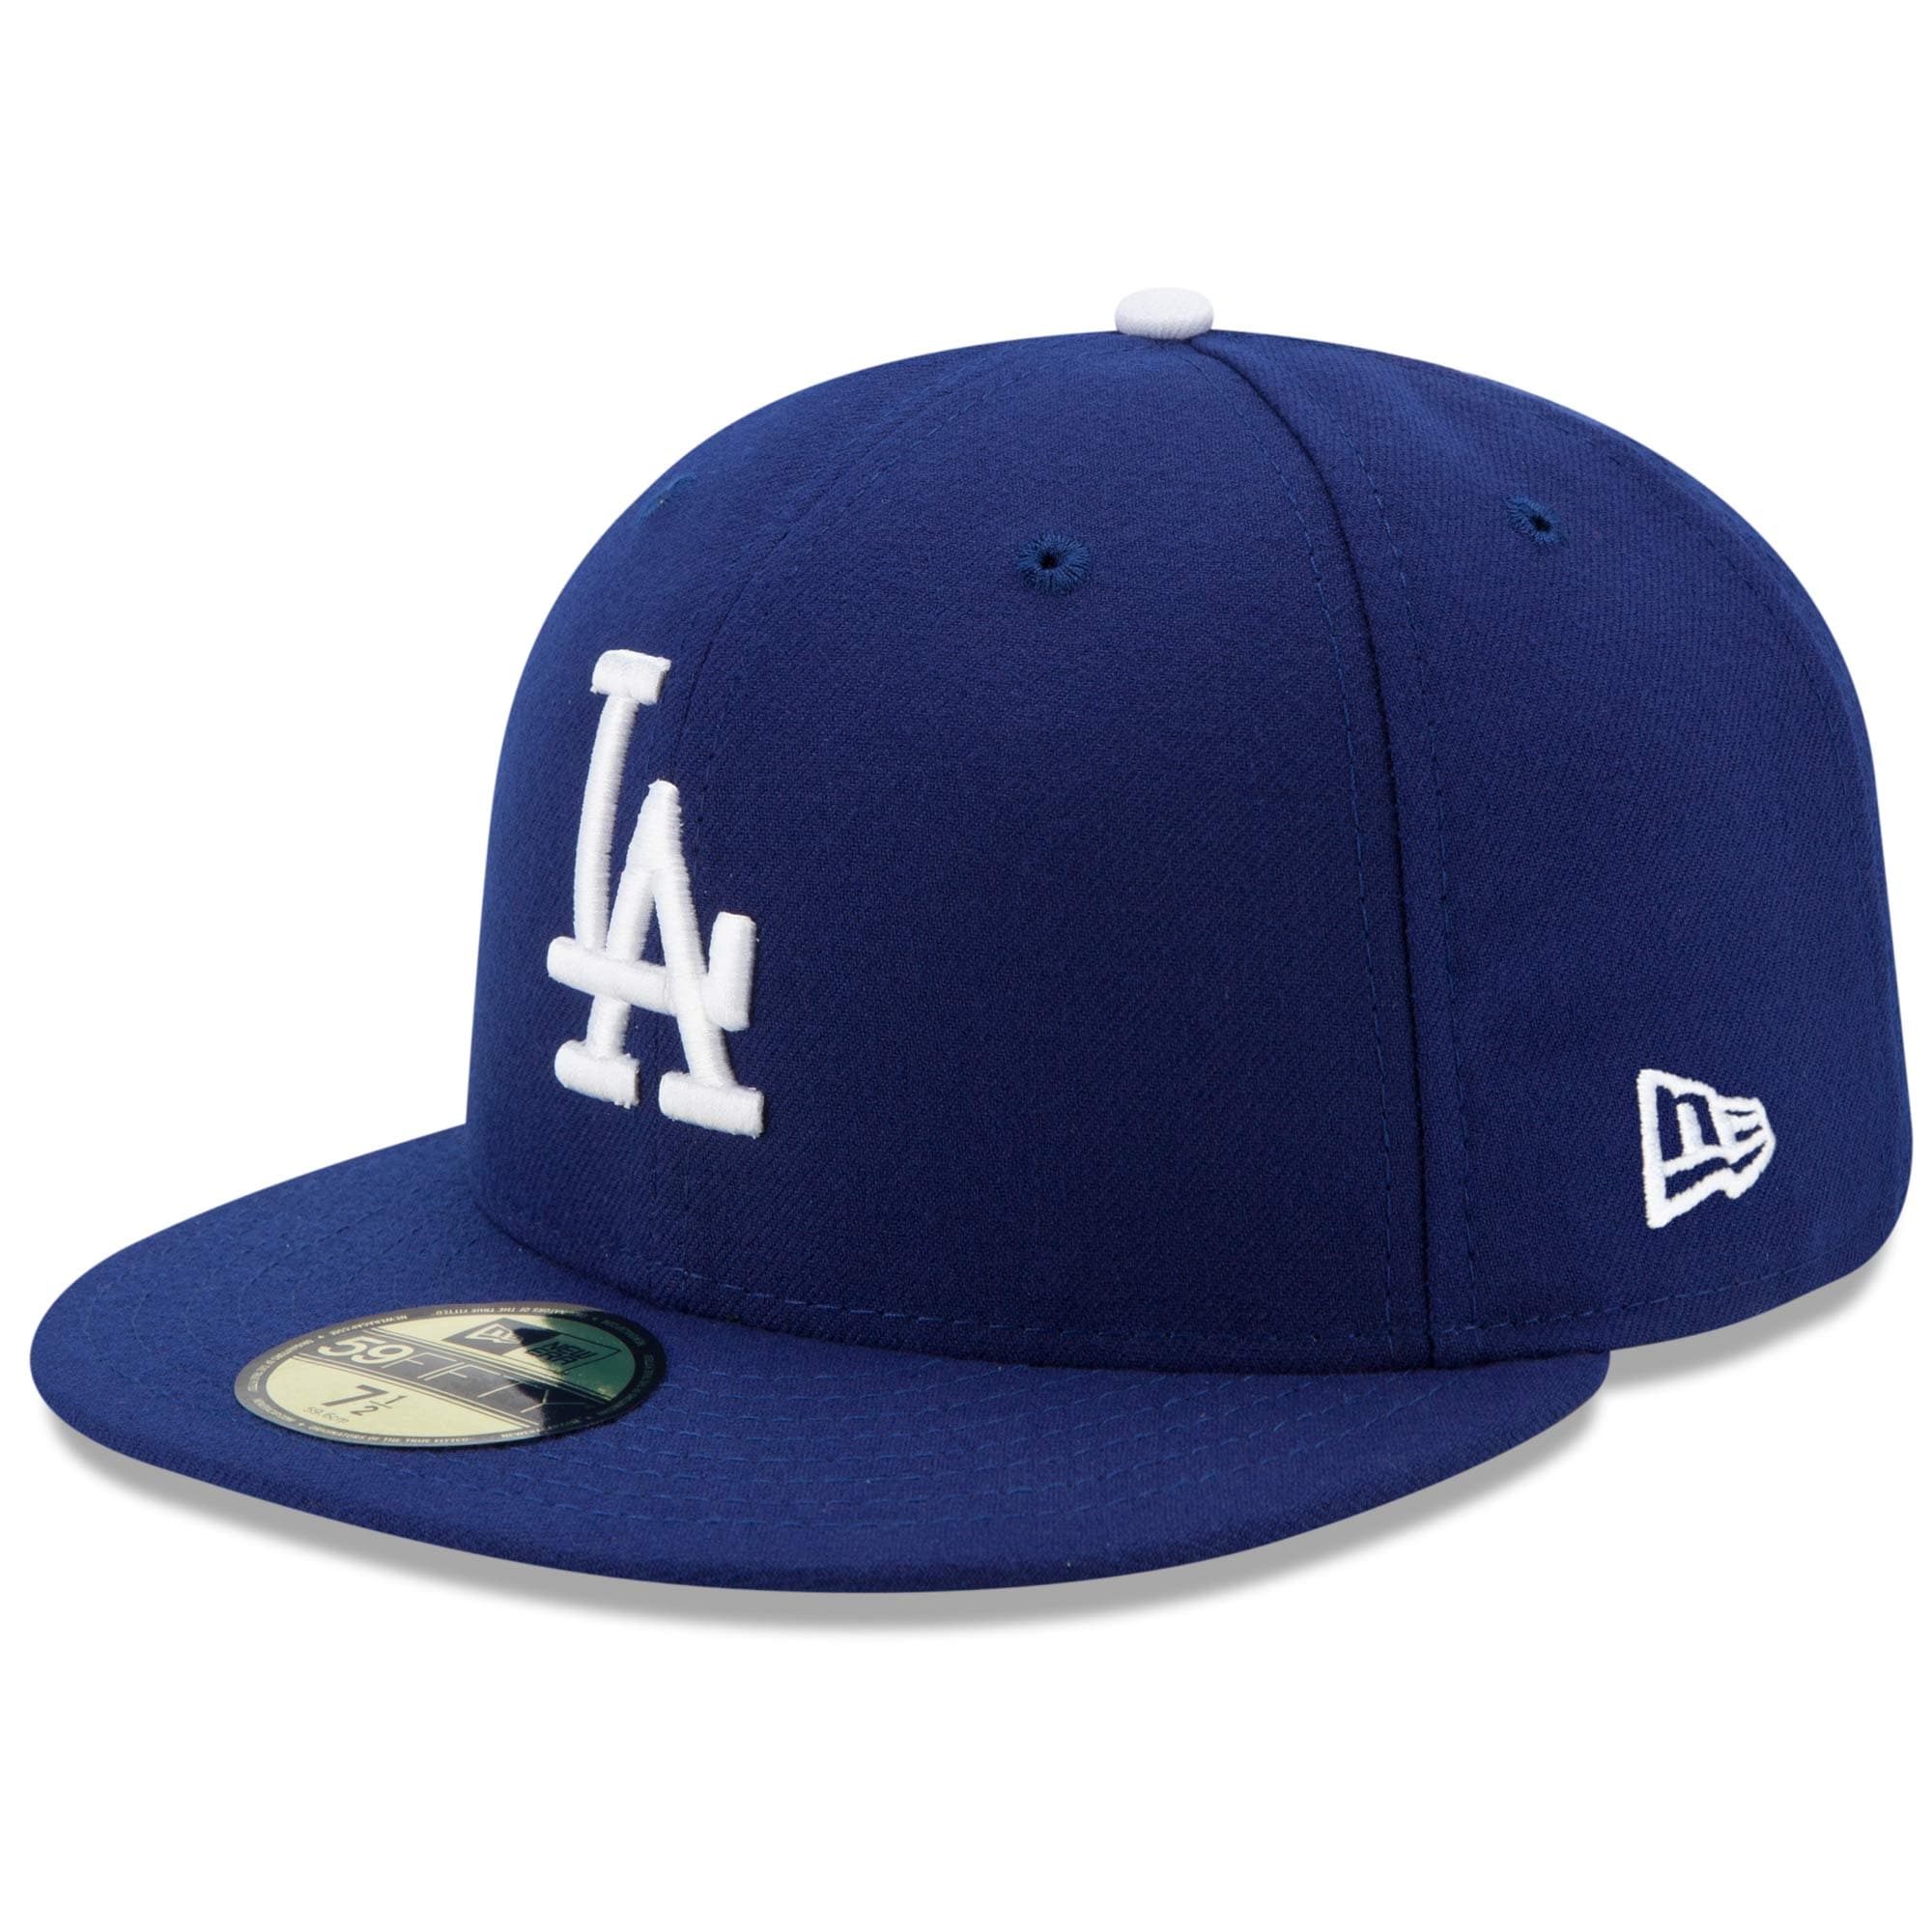 Men's New Era Royal Los Angeles Dodgers Authentic Collection On Field 59FIFTY Performance Fitted Hat - image 1 of 5